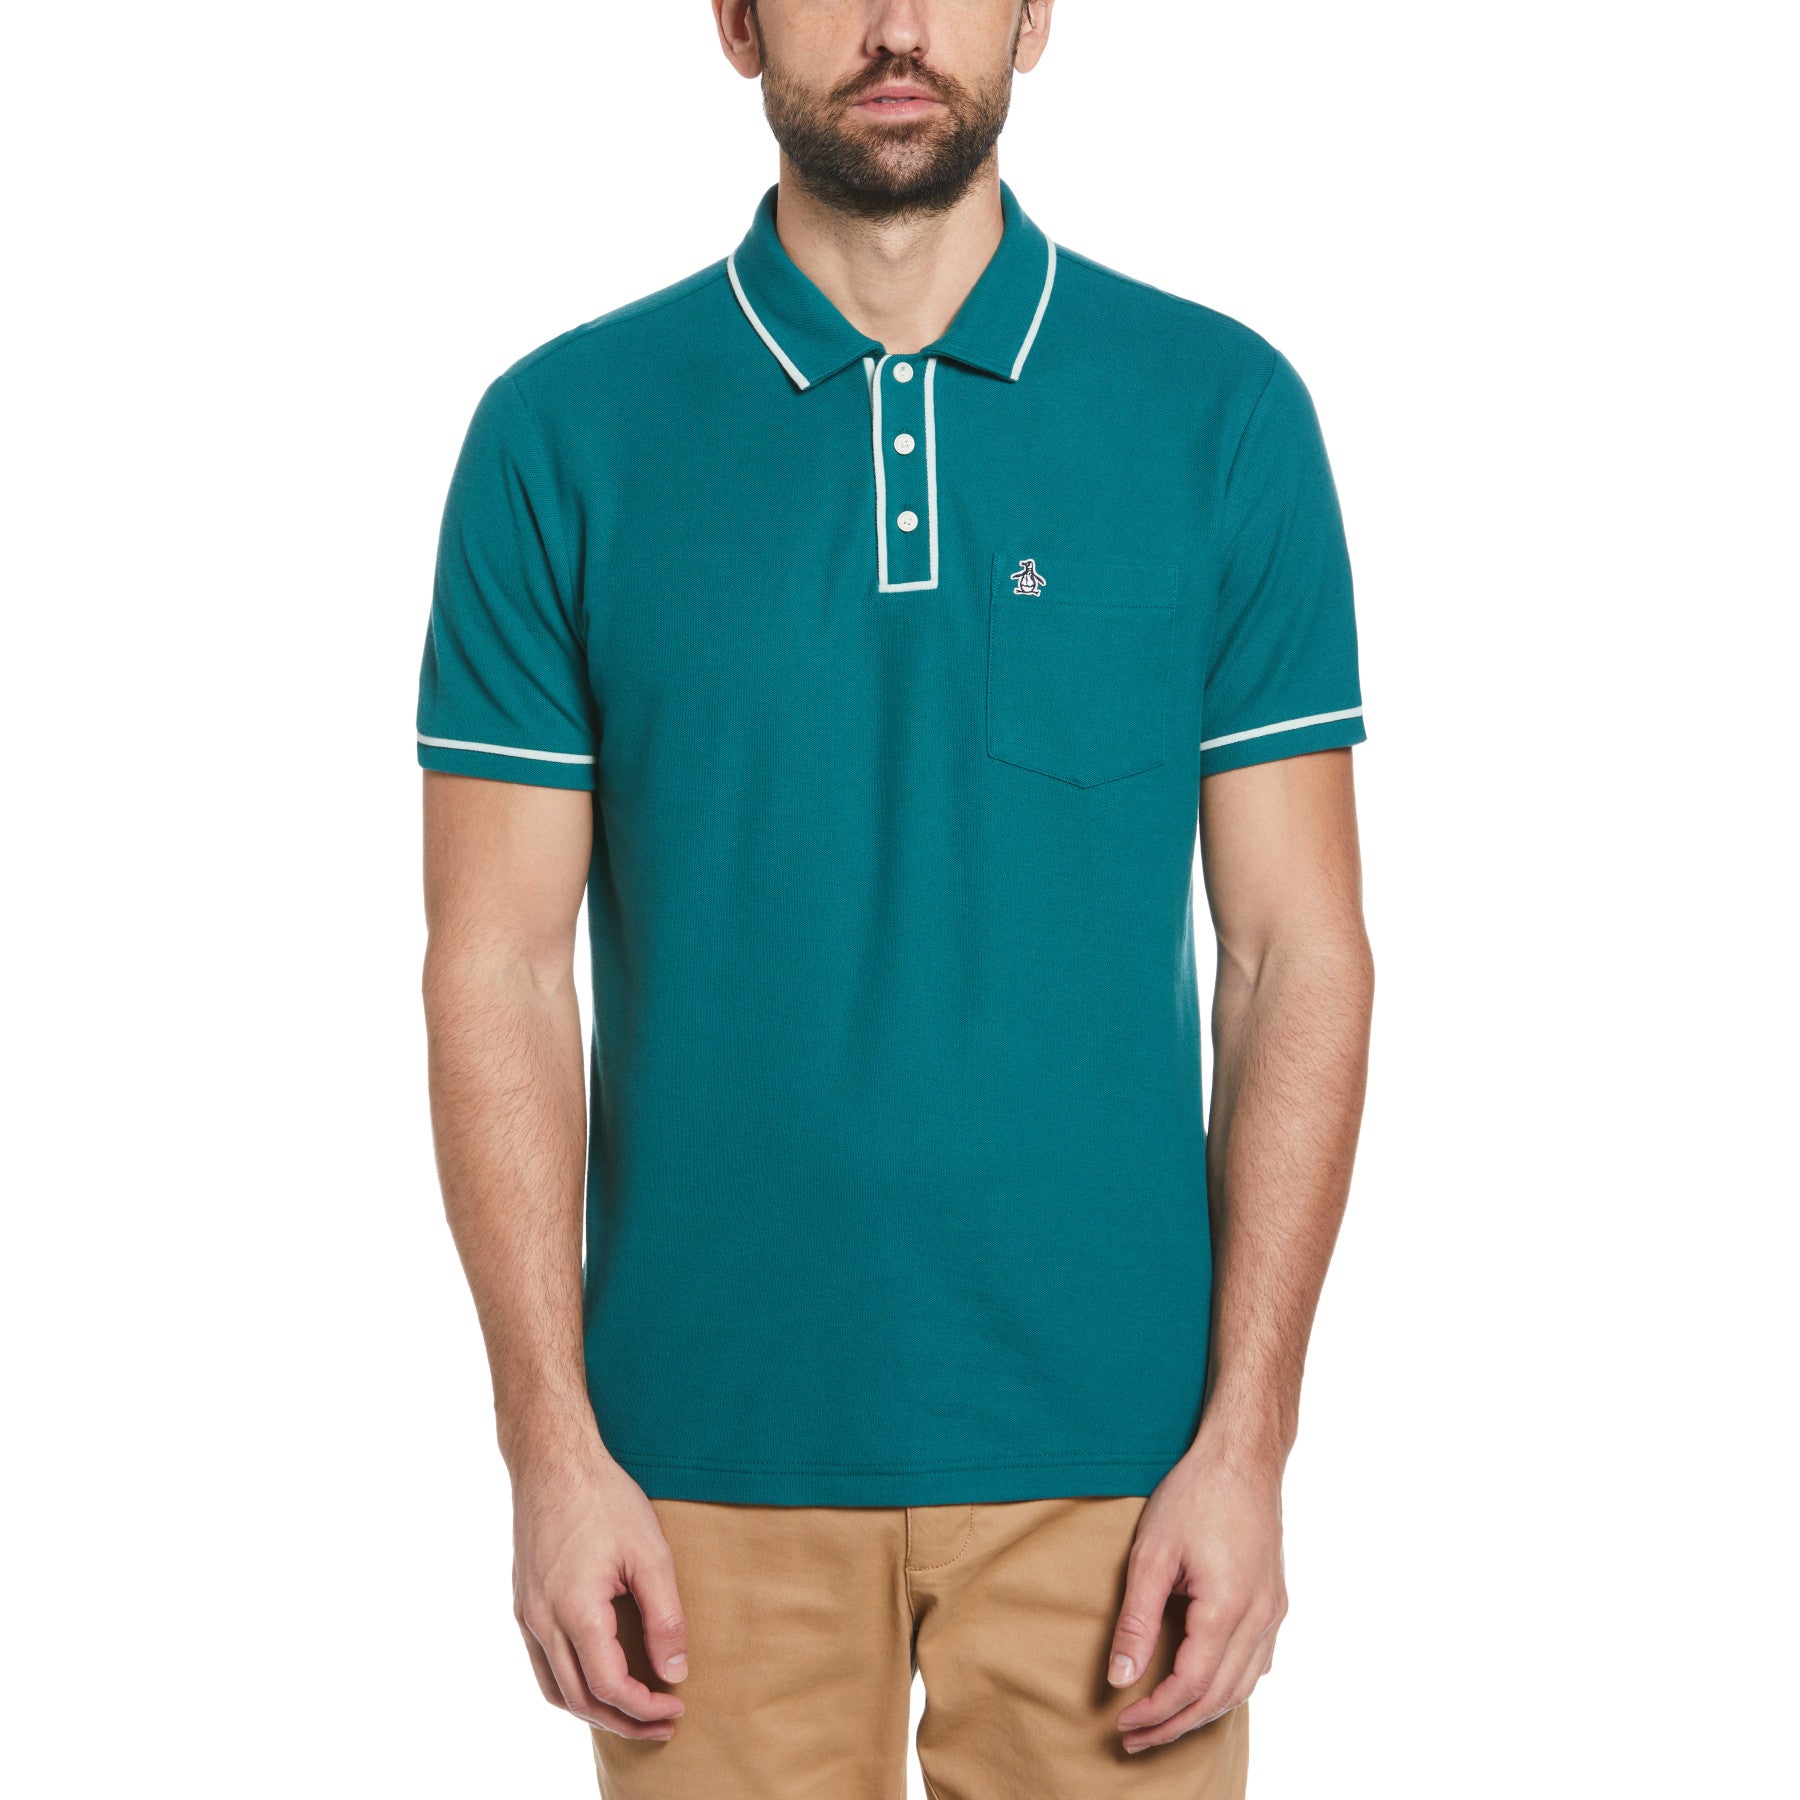 View Earl Organic Cotton Polo Shirt In Pacific information